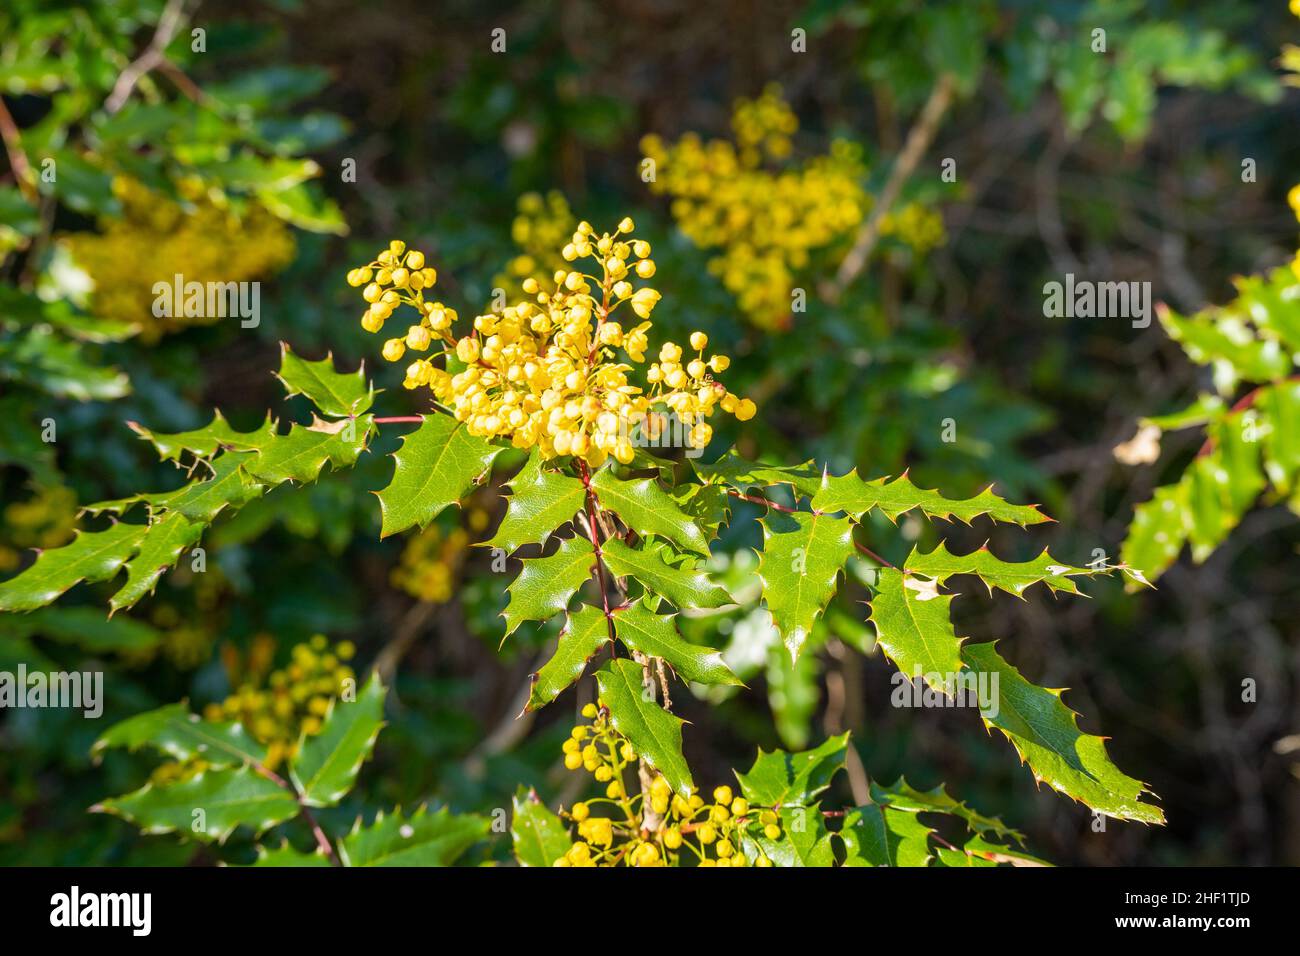 Common holly (Ilex aquifolium) is a species of holly native to western and southern Europe, northwest Africa, and southwest Asia. Stock Photo